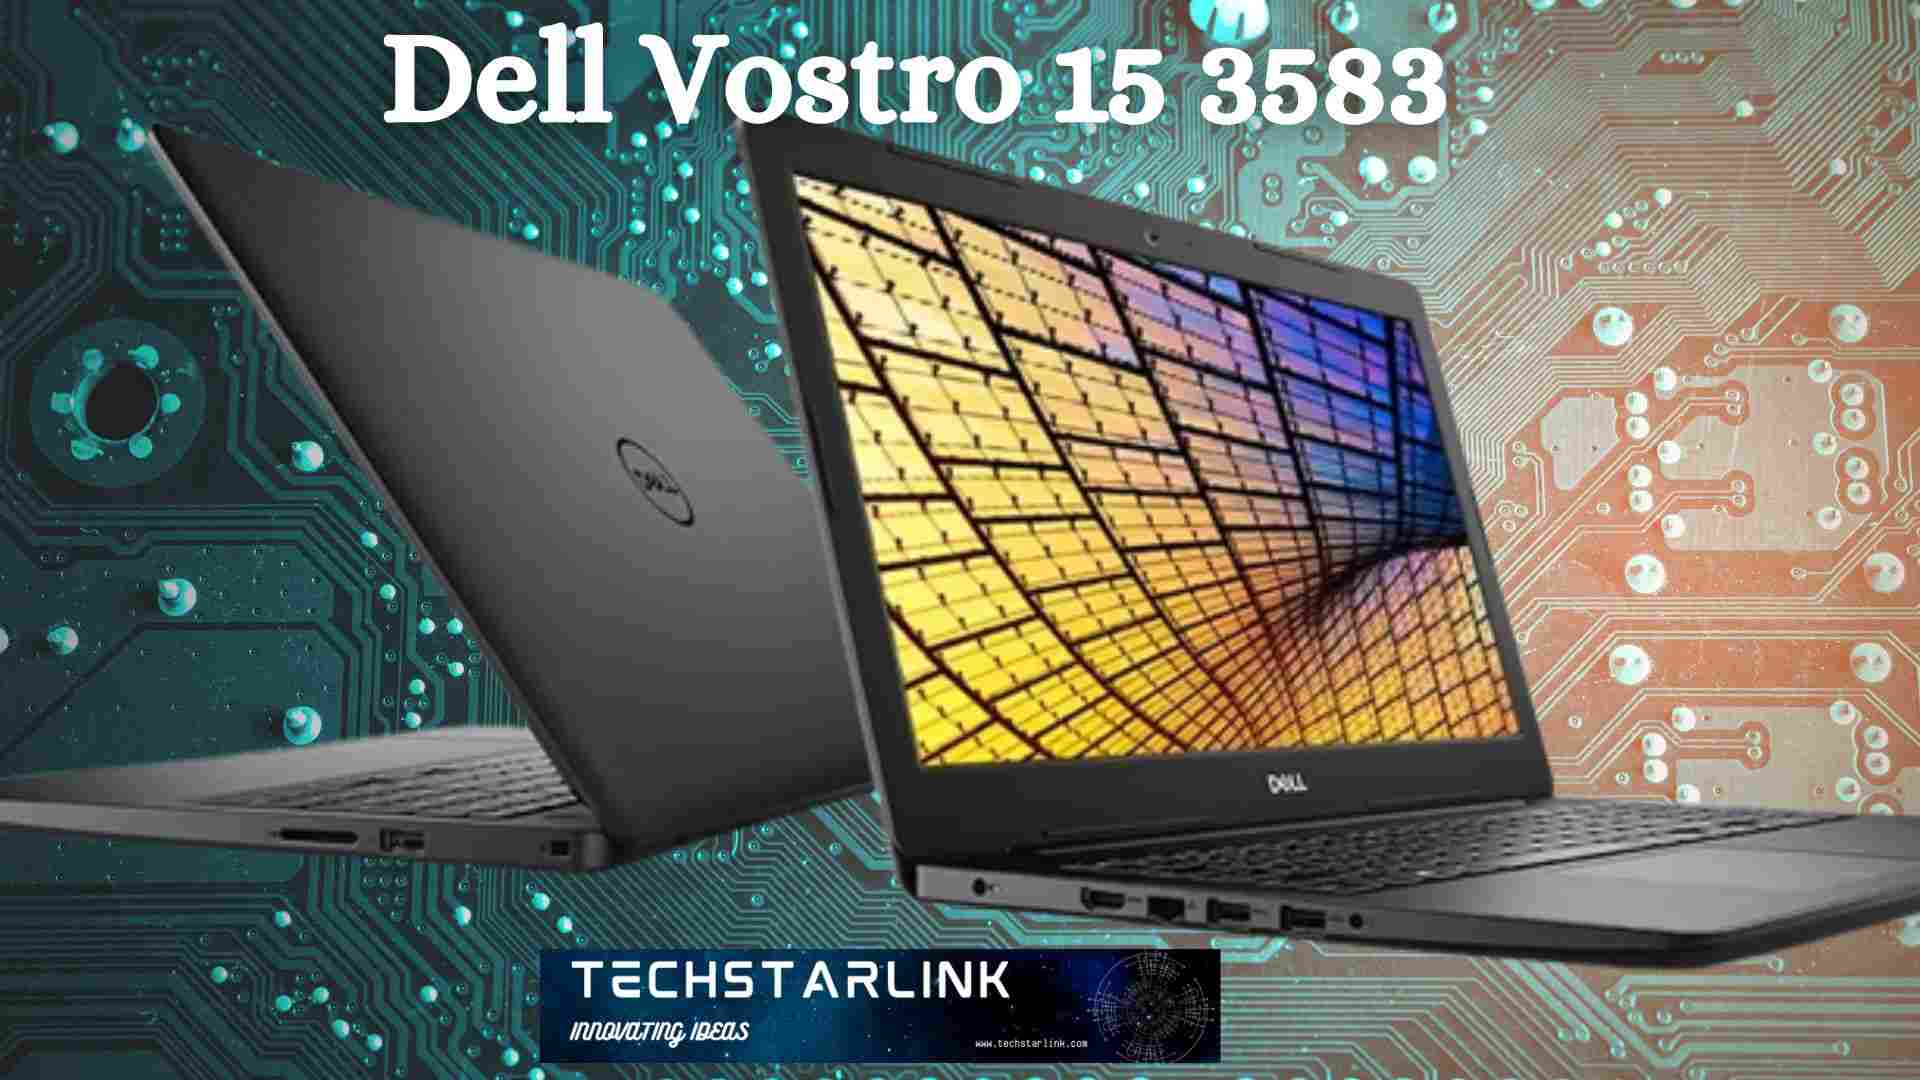 Dell Vostro 15 3583: Review of Budget Friendly Laptop Specs & Price